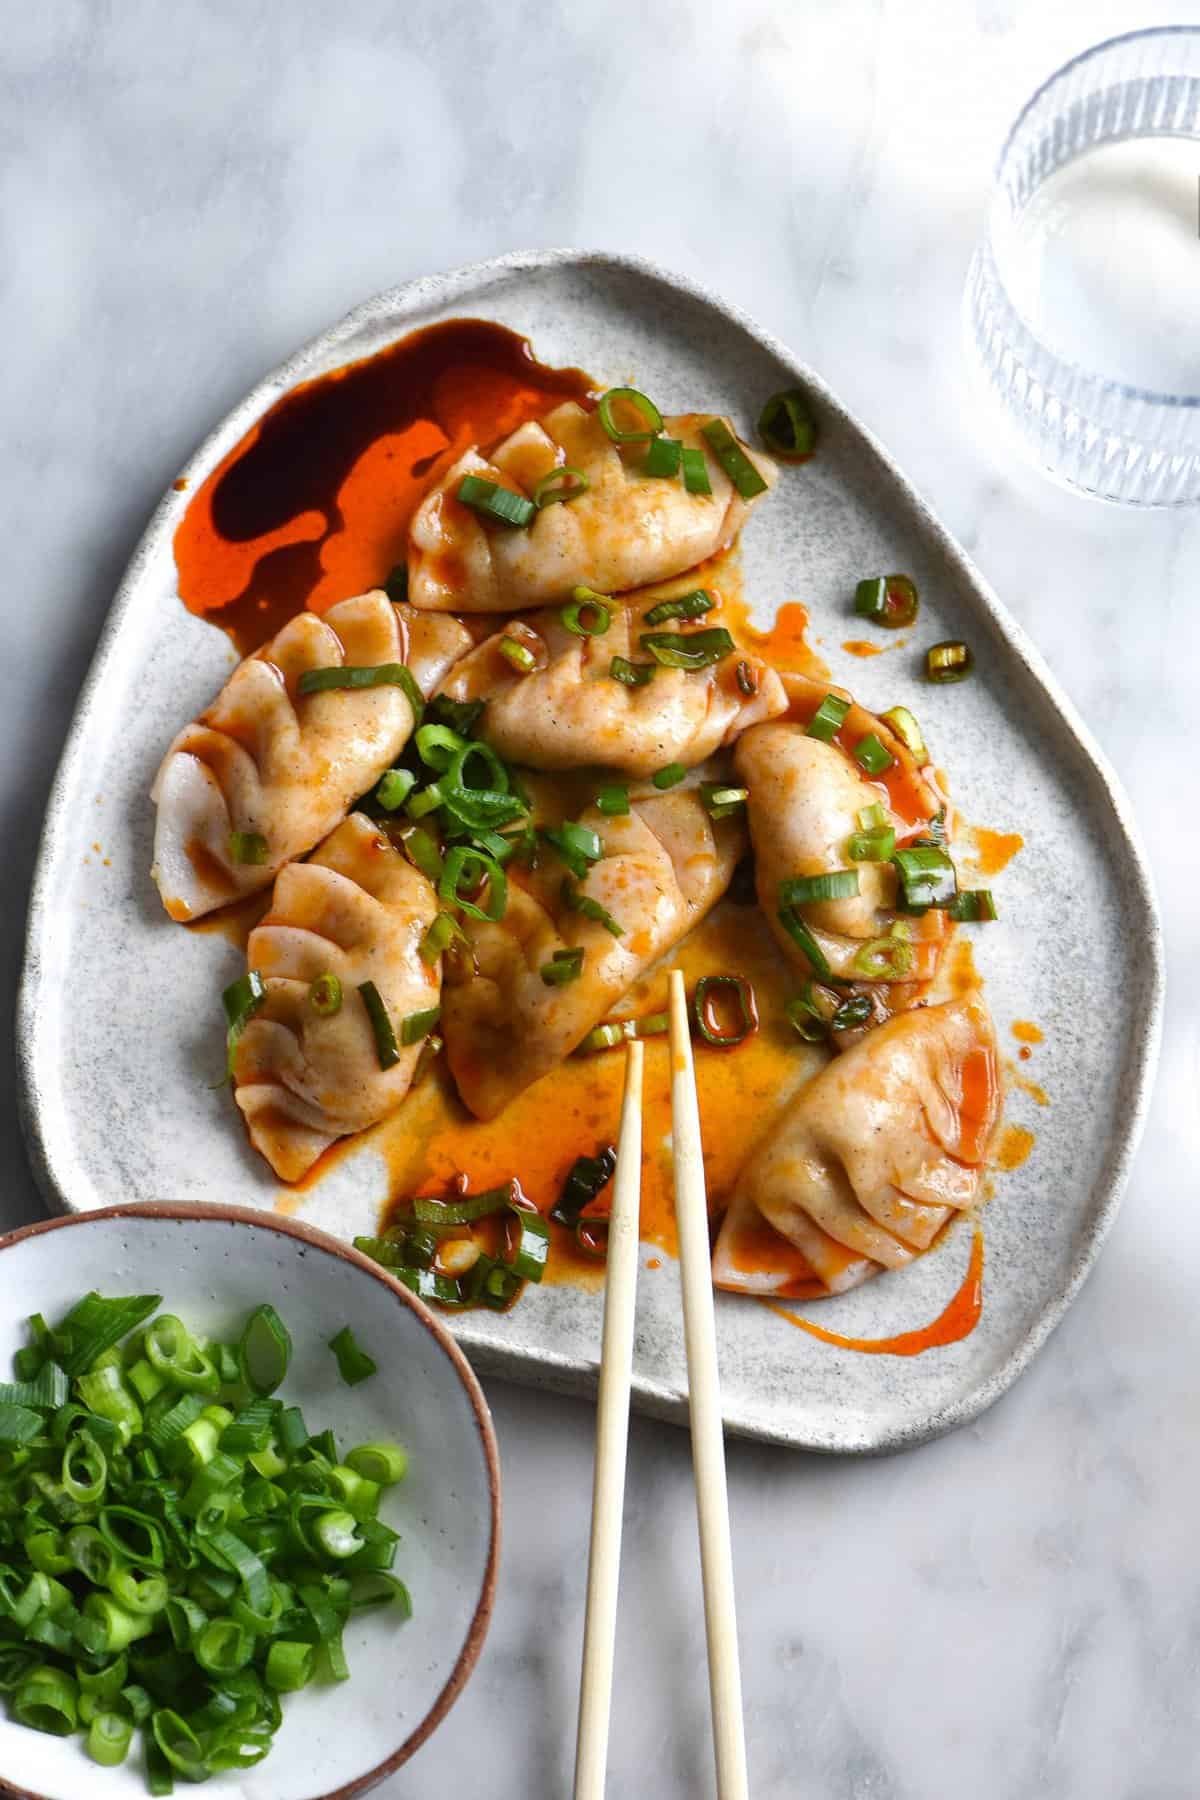 A plate of vegan, gluten free and FODMAP friendly dumplings sit atop a white marble table. The dumplings are pleated, and drizzled with chilli oil, tamari and spring onion greens. Chopsticks rest on the edge of the plate and a small ceramic dish of spring onion greens sits to the left of the dumplings